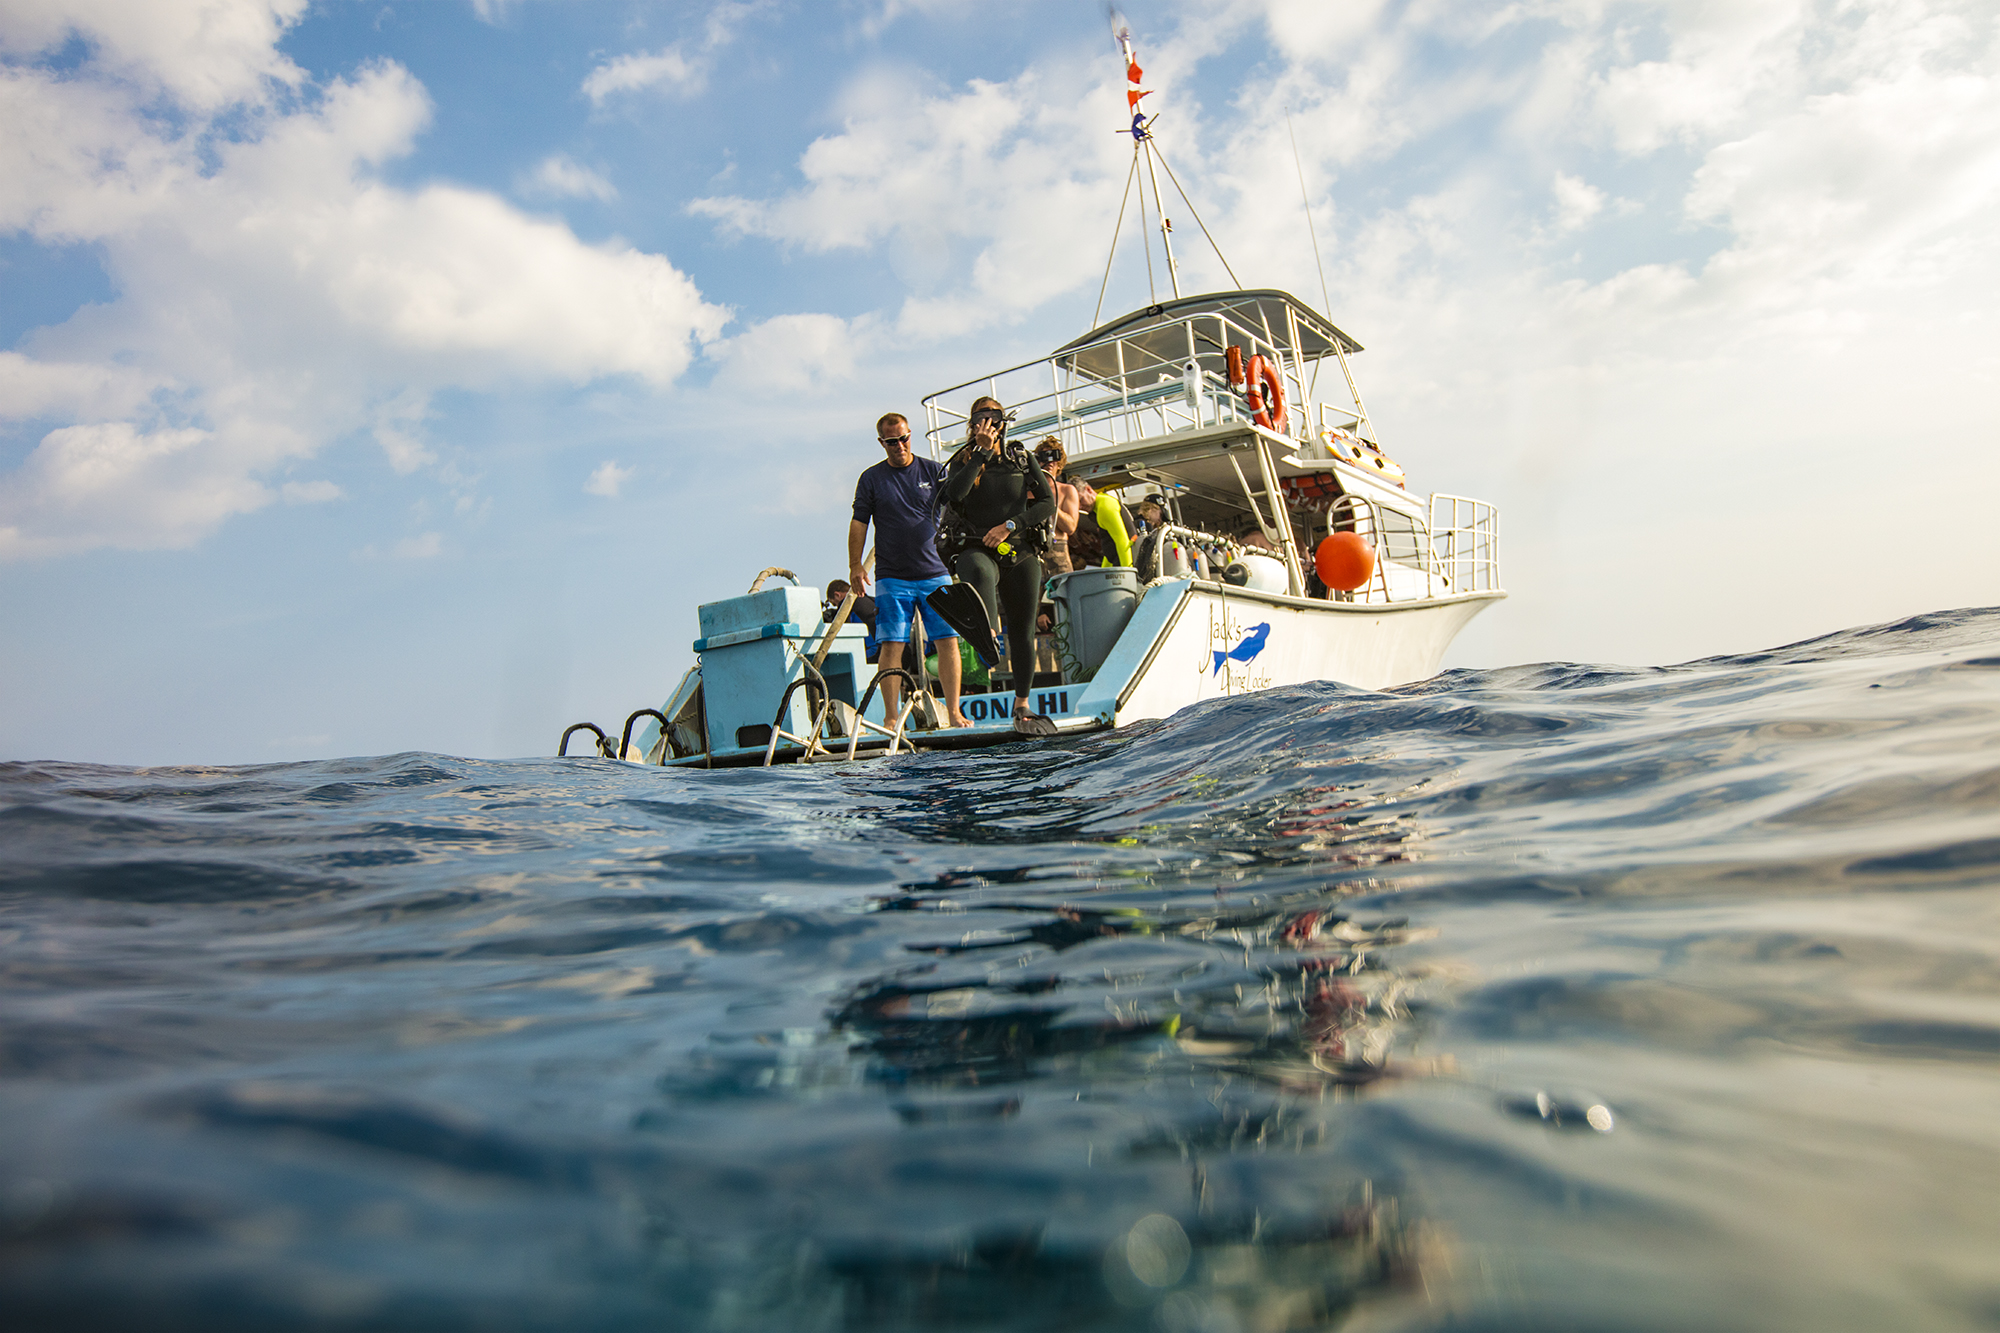 A group of scuba divers jumping into the water from a dive boat under the guidance of a PADI Divemaster